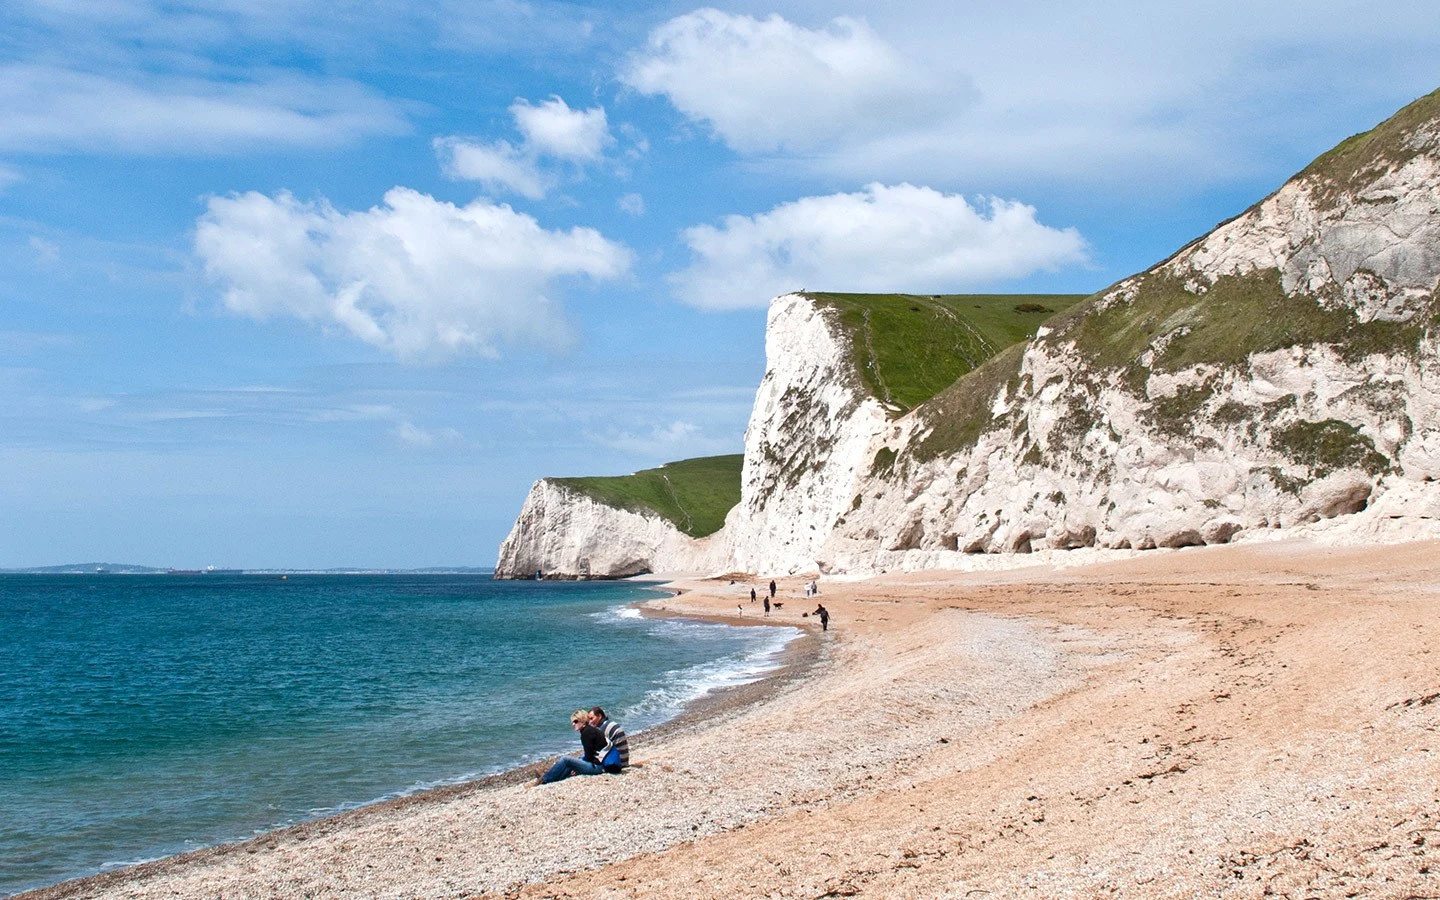 Beach at Durdle Door in Dorset – one of the six alternative places to visit in England